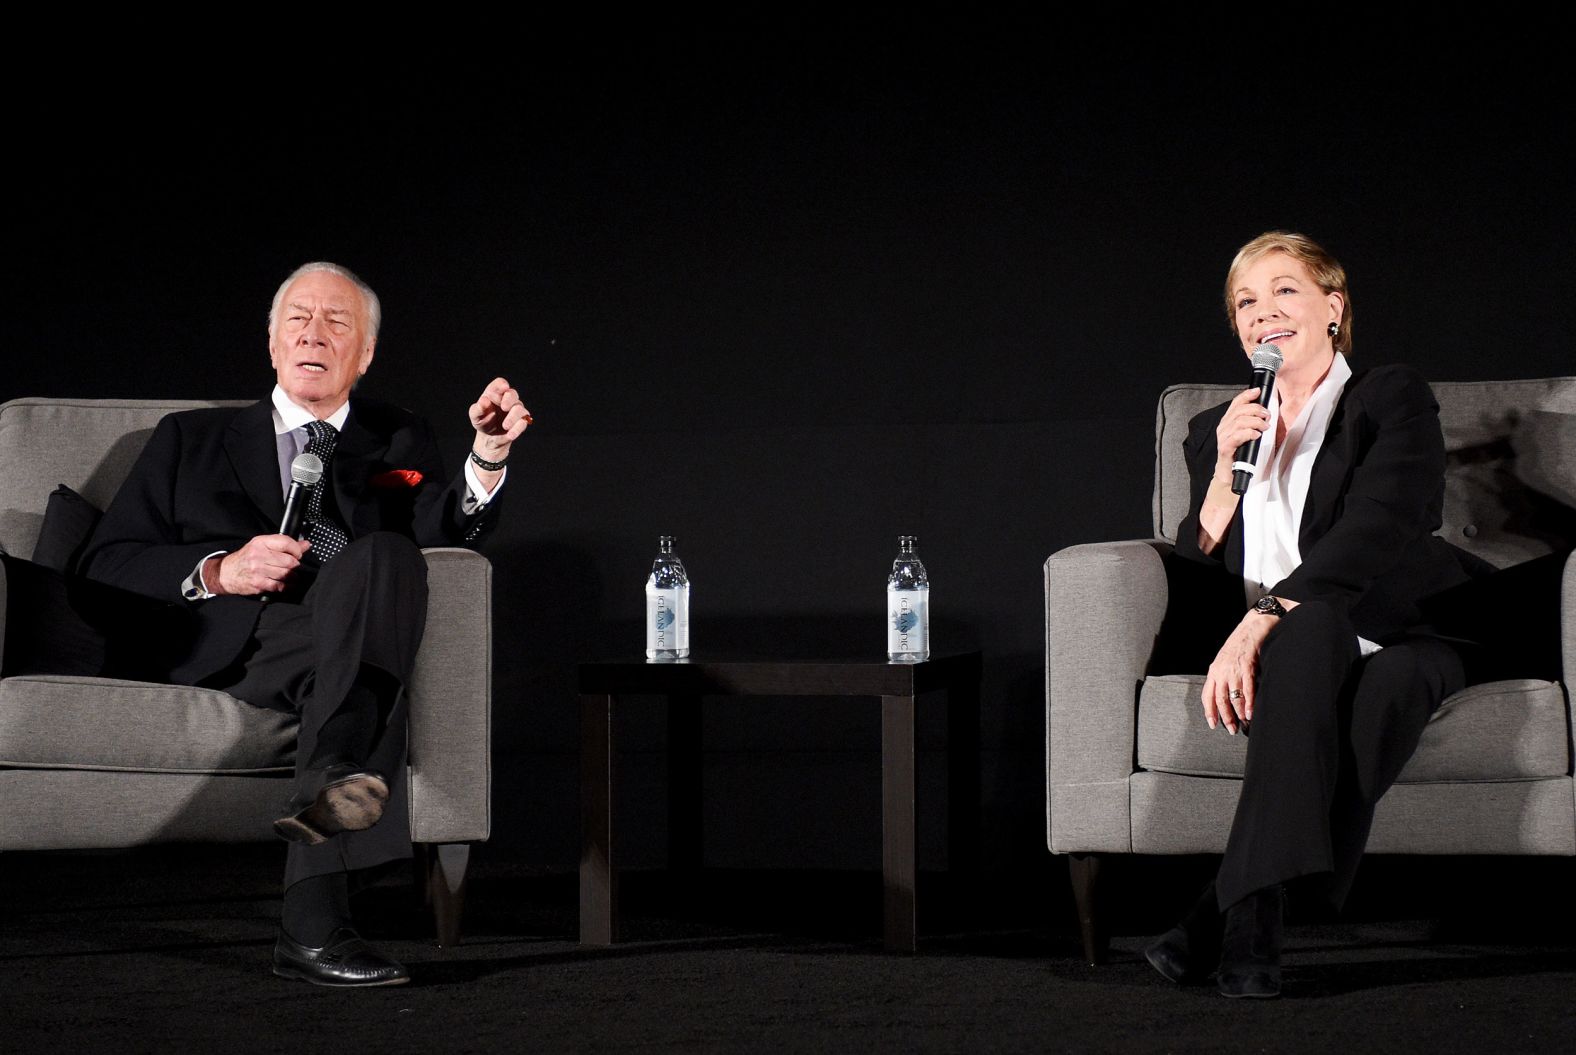 Andrews and her former "Sound of Music" co-star Christopher Plummer speak on stage at the TCM Classic Film Festival in 2015. It was the movie's 50th anniversary.